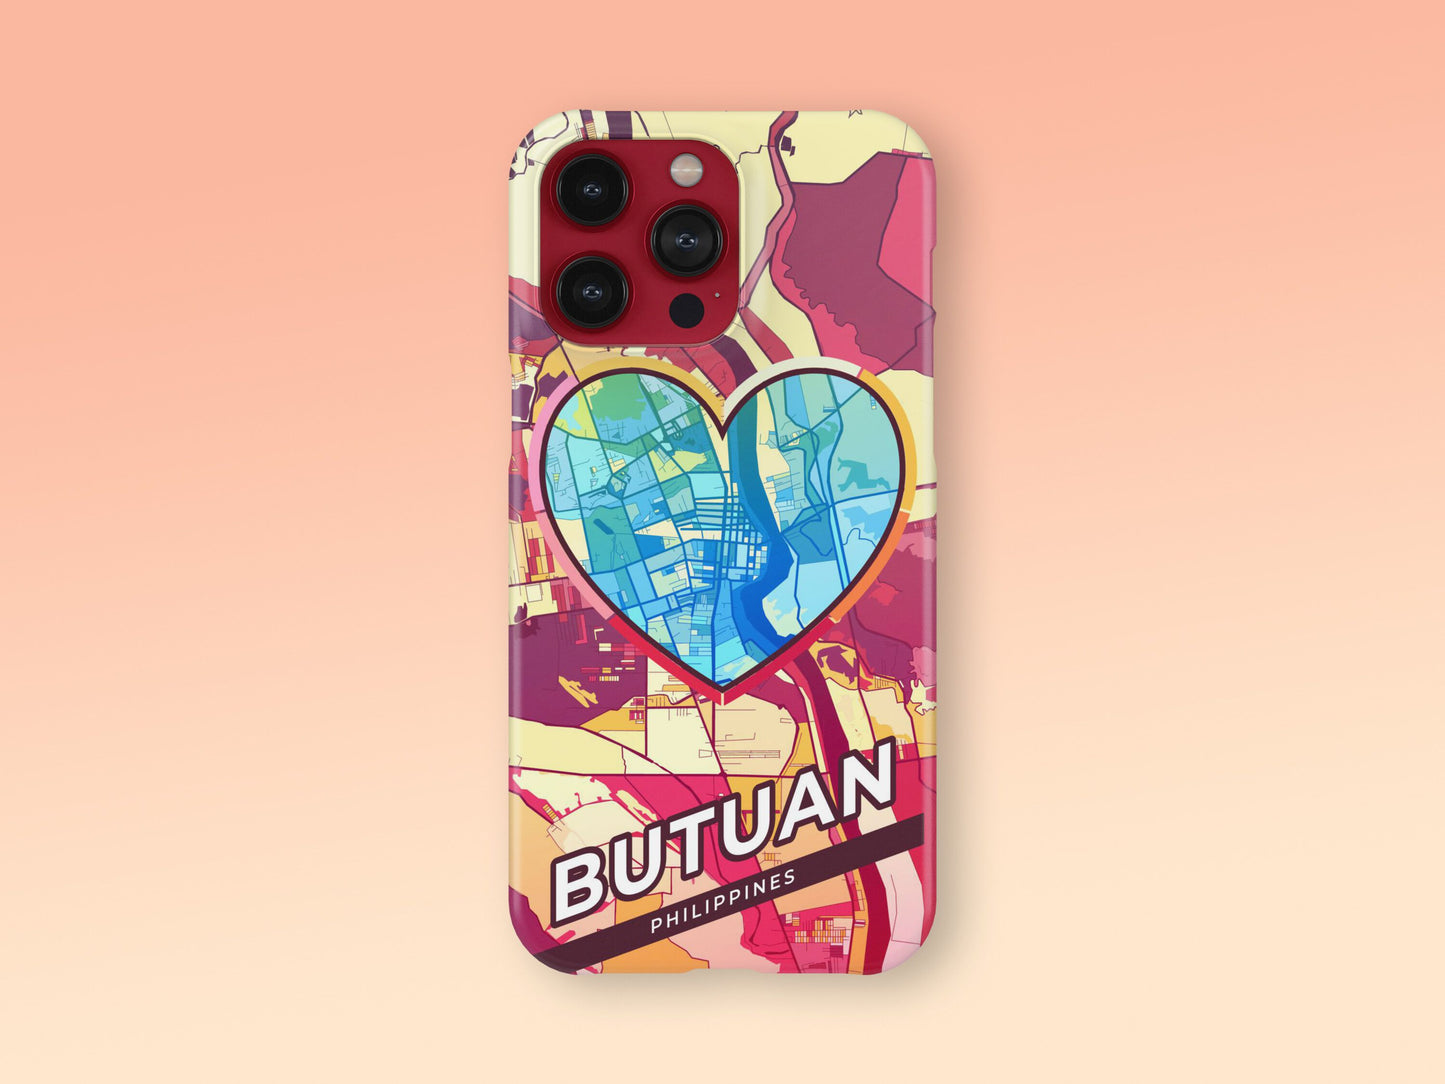 Butuan Philippines slim phone case with colorful icon. Birthday, wedding or housewarming gift. Couple match cases. 2